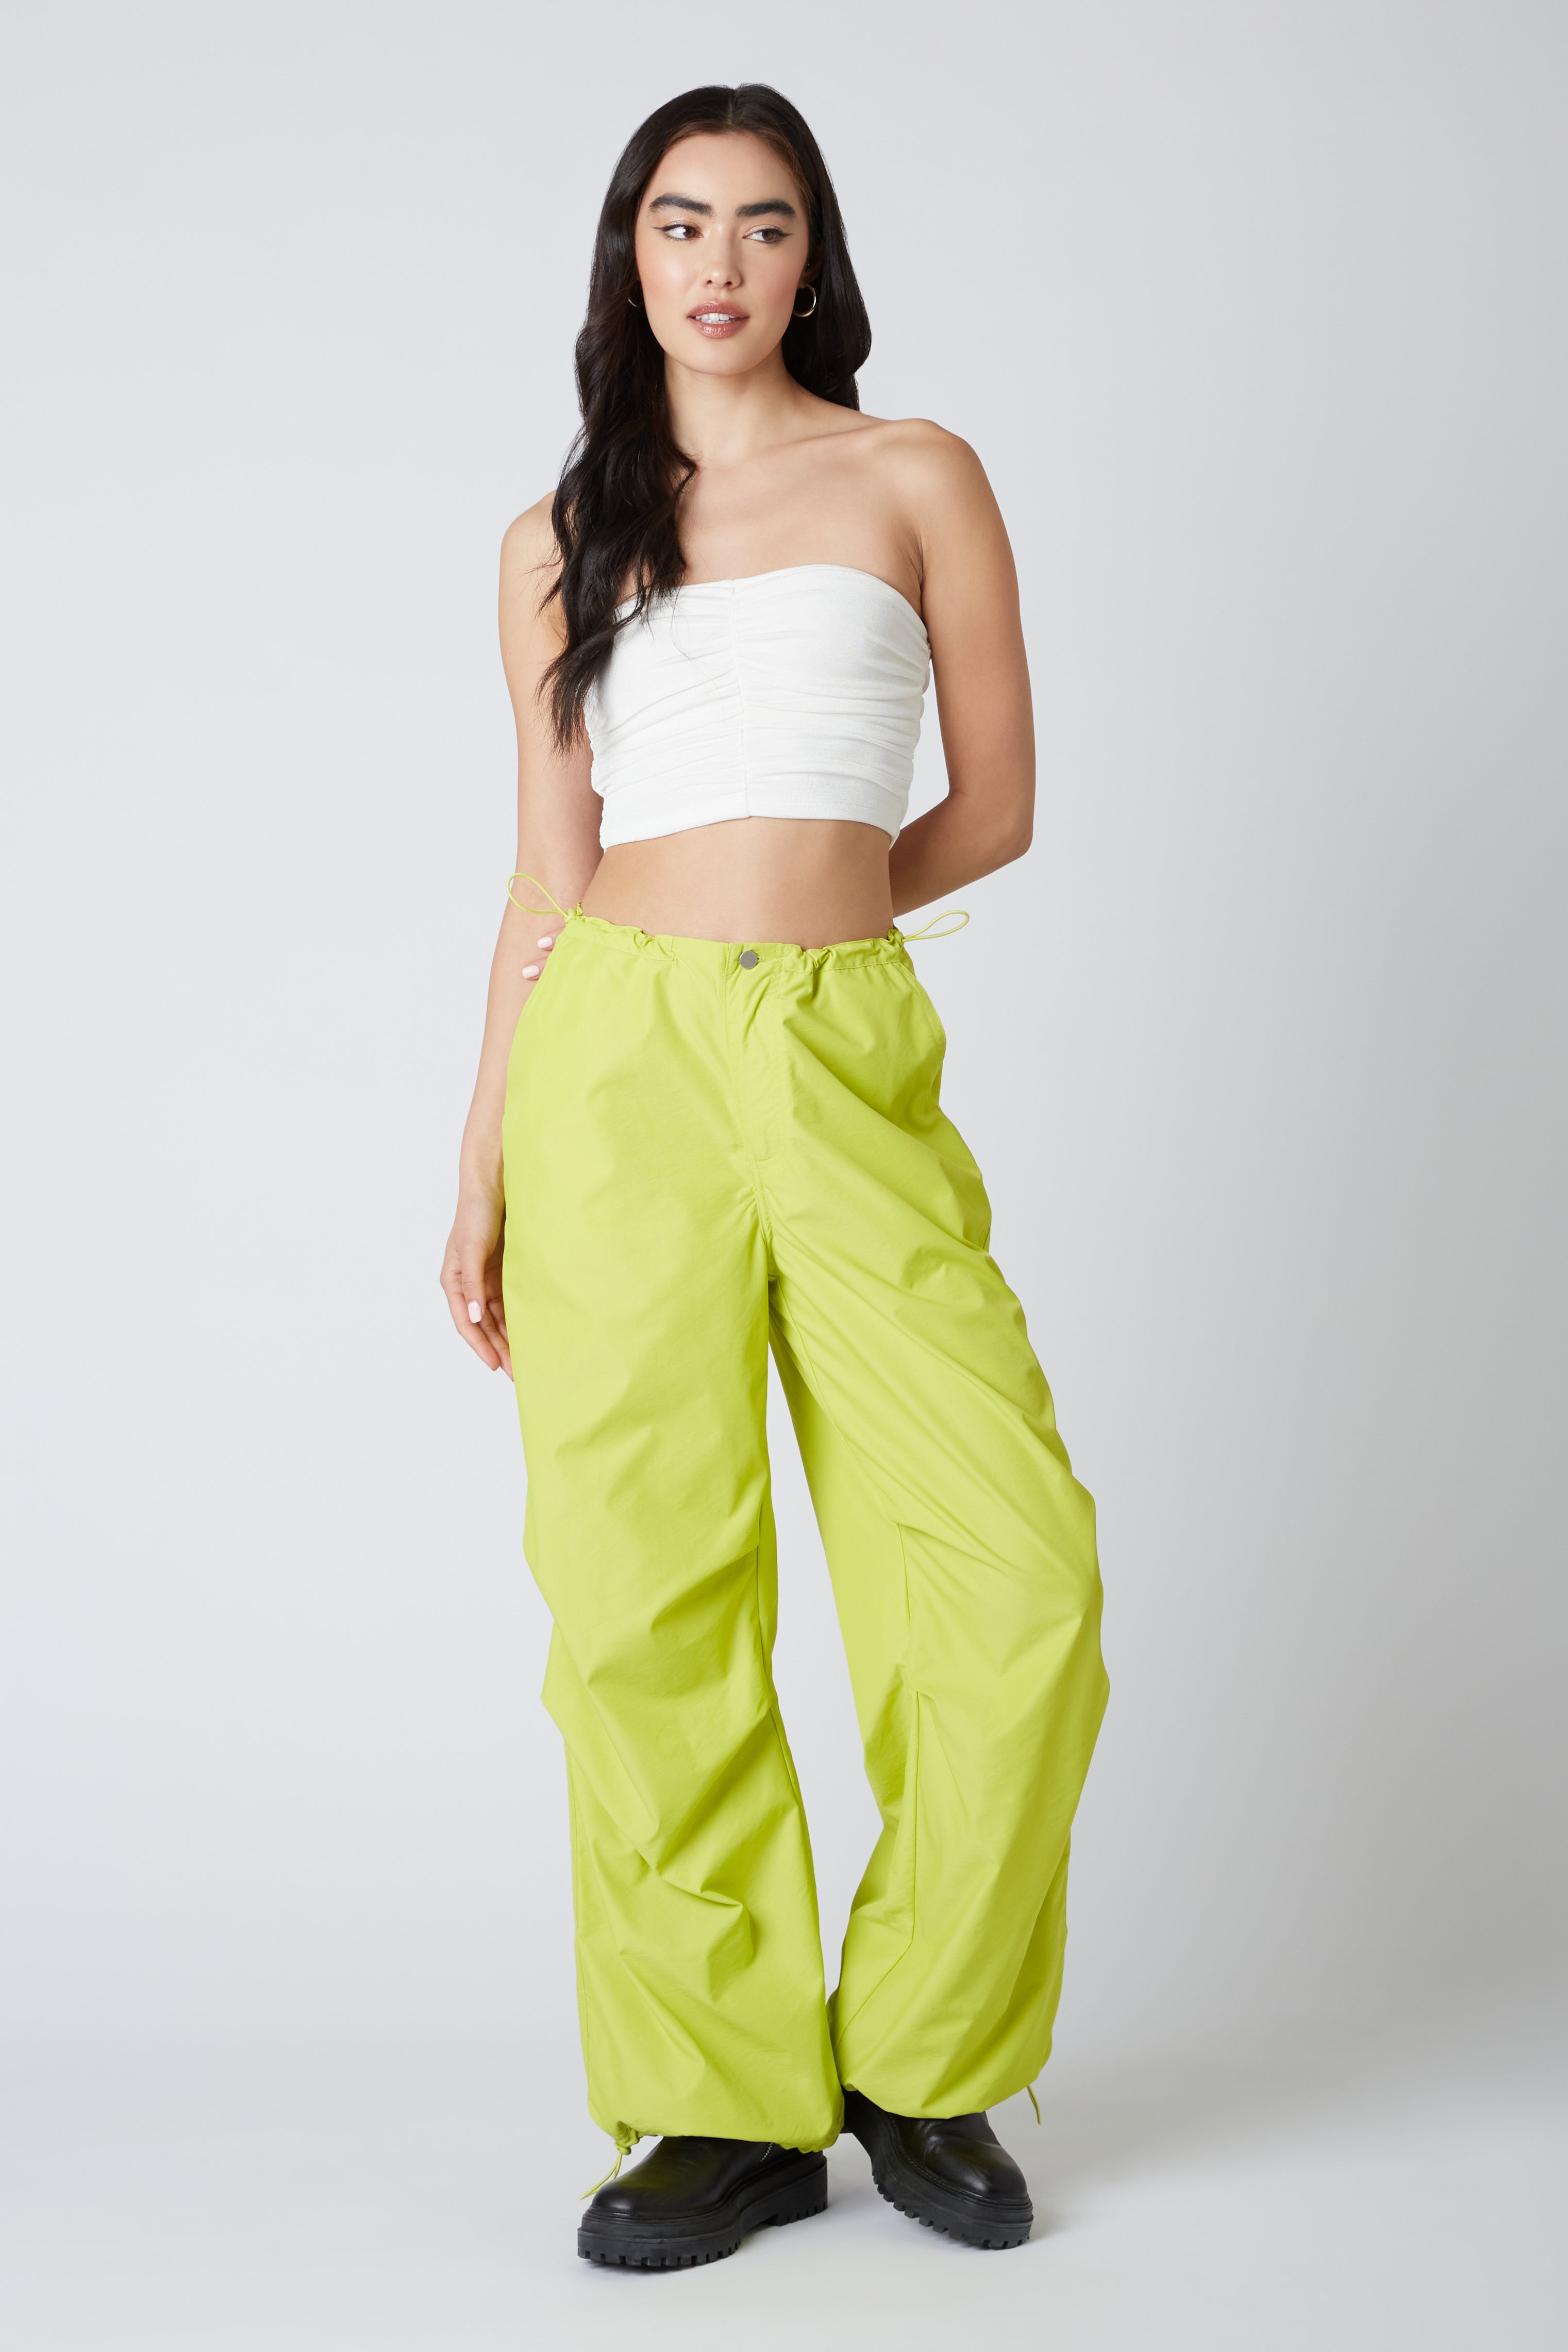 Parachute Pants in Lime Front View